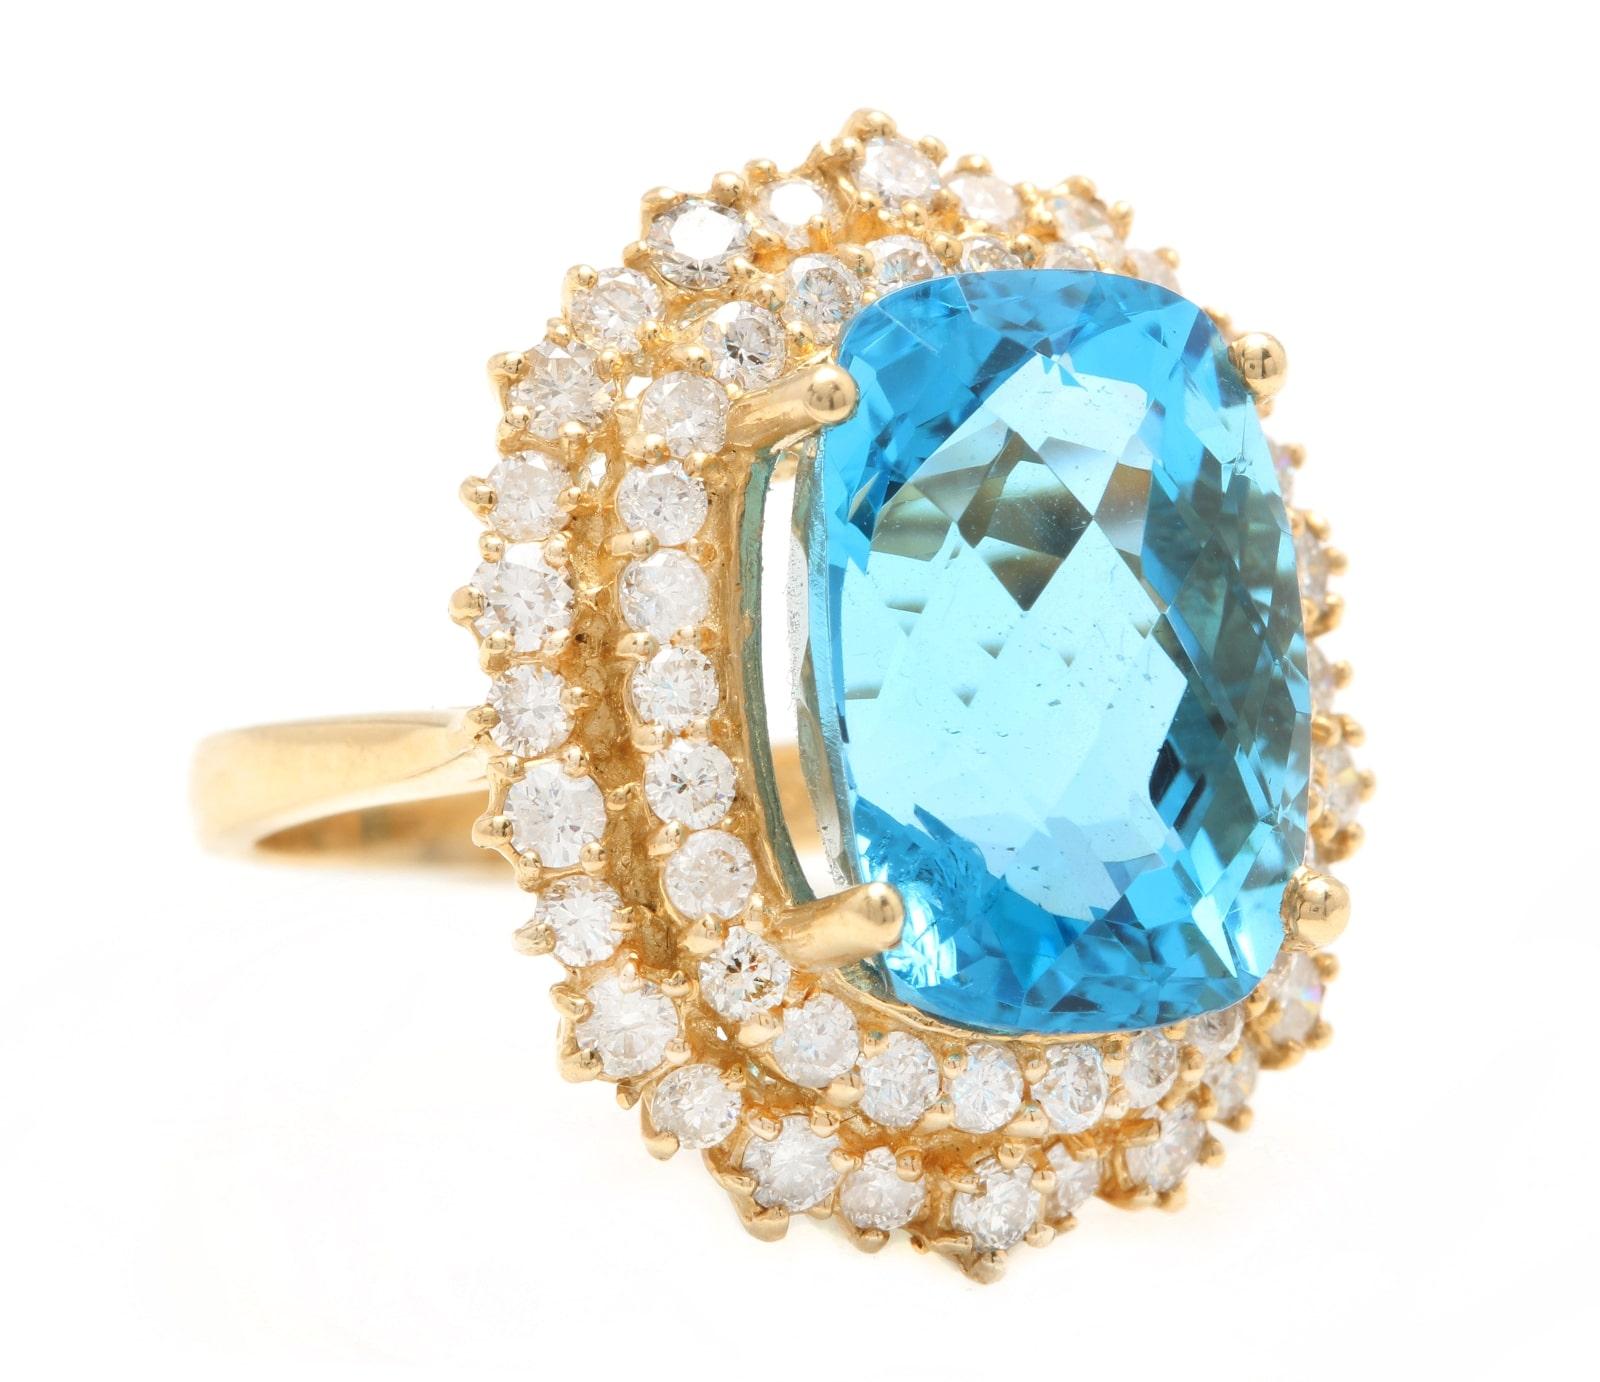 14.60 Carats Impressive Natural Swiss Blue Topaz and Diamond 14K Solid Yellow Gold Ring

Topaz Measures: Approx. 15.00 x 11.00mm

Natural Round Diamonds Weight: Approx. 1.60 Carats (color G-H / Clarity SI1-SI2)

Ring size: 6 (free re-sizing